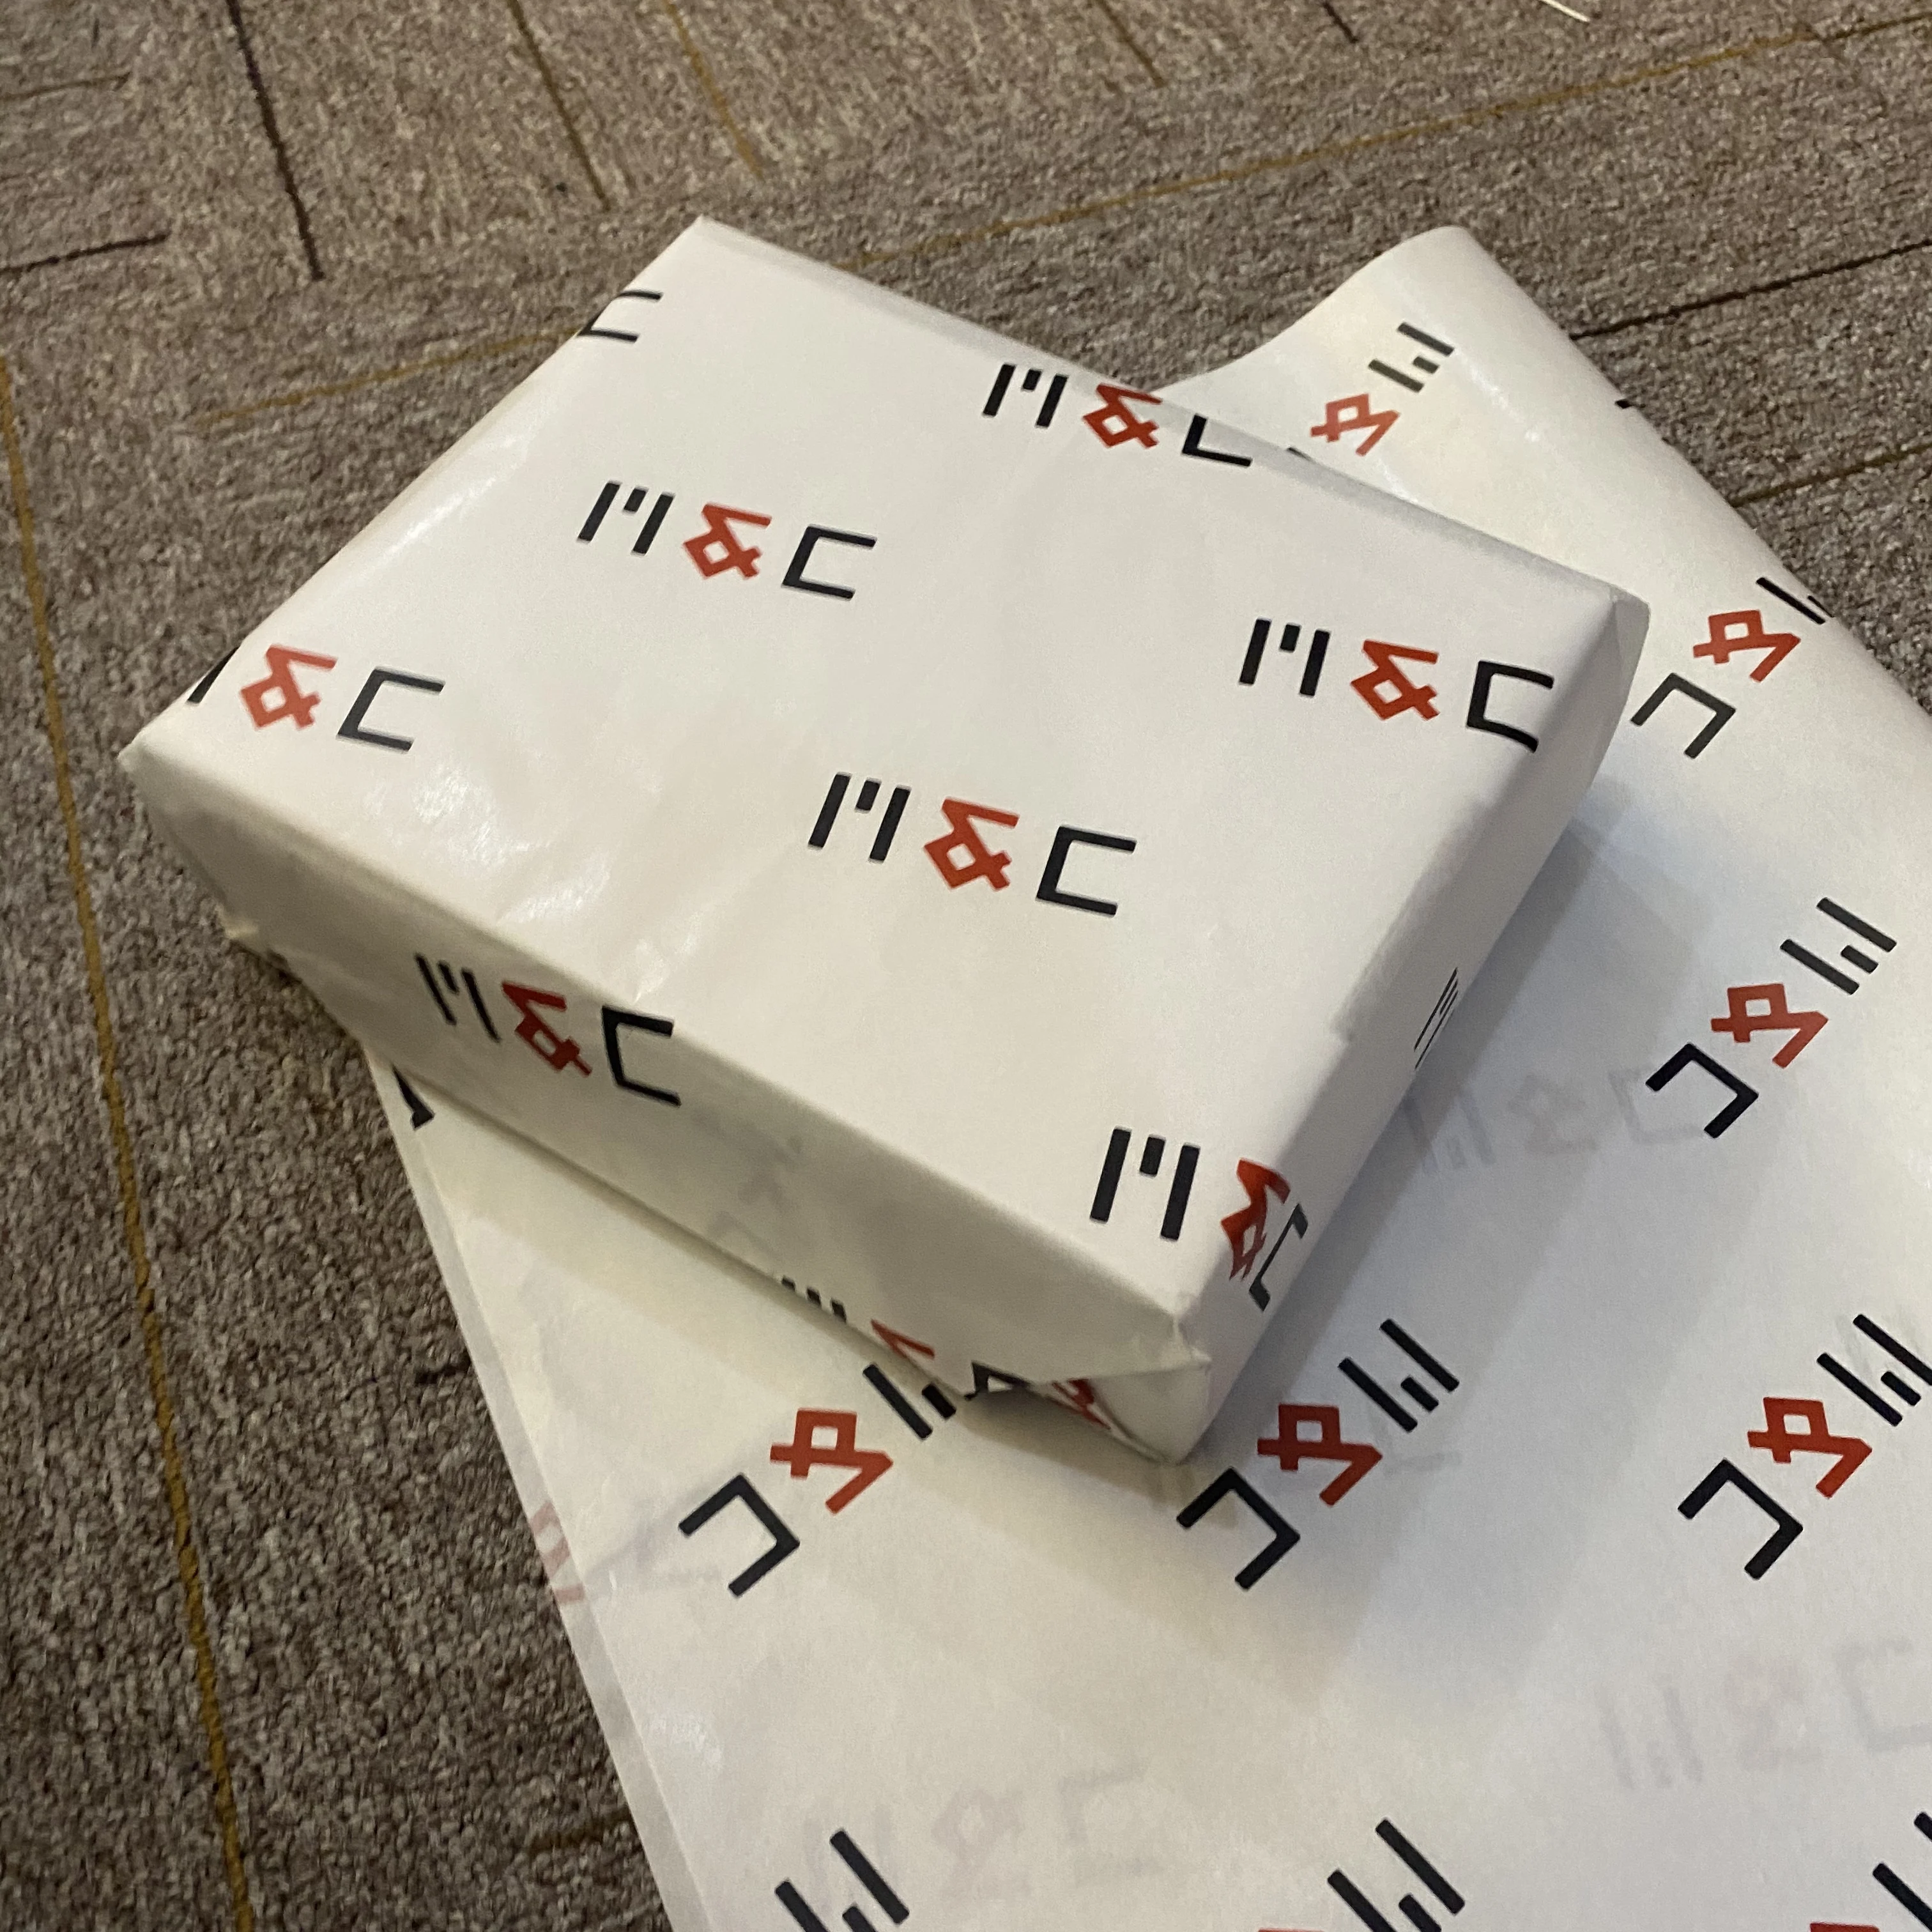 Custom printed tissue paper with logo for packaging - Custom tissue  wrapping paper - Magro Luxury Paper